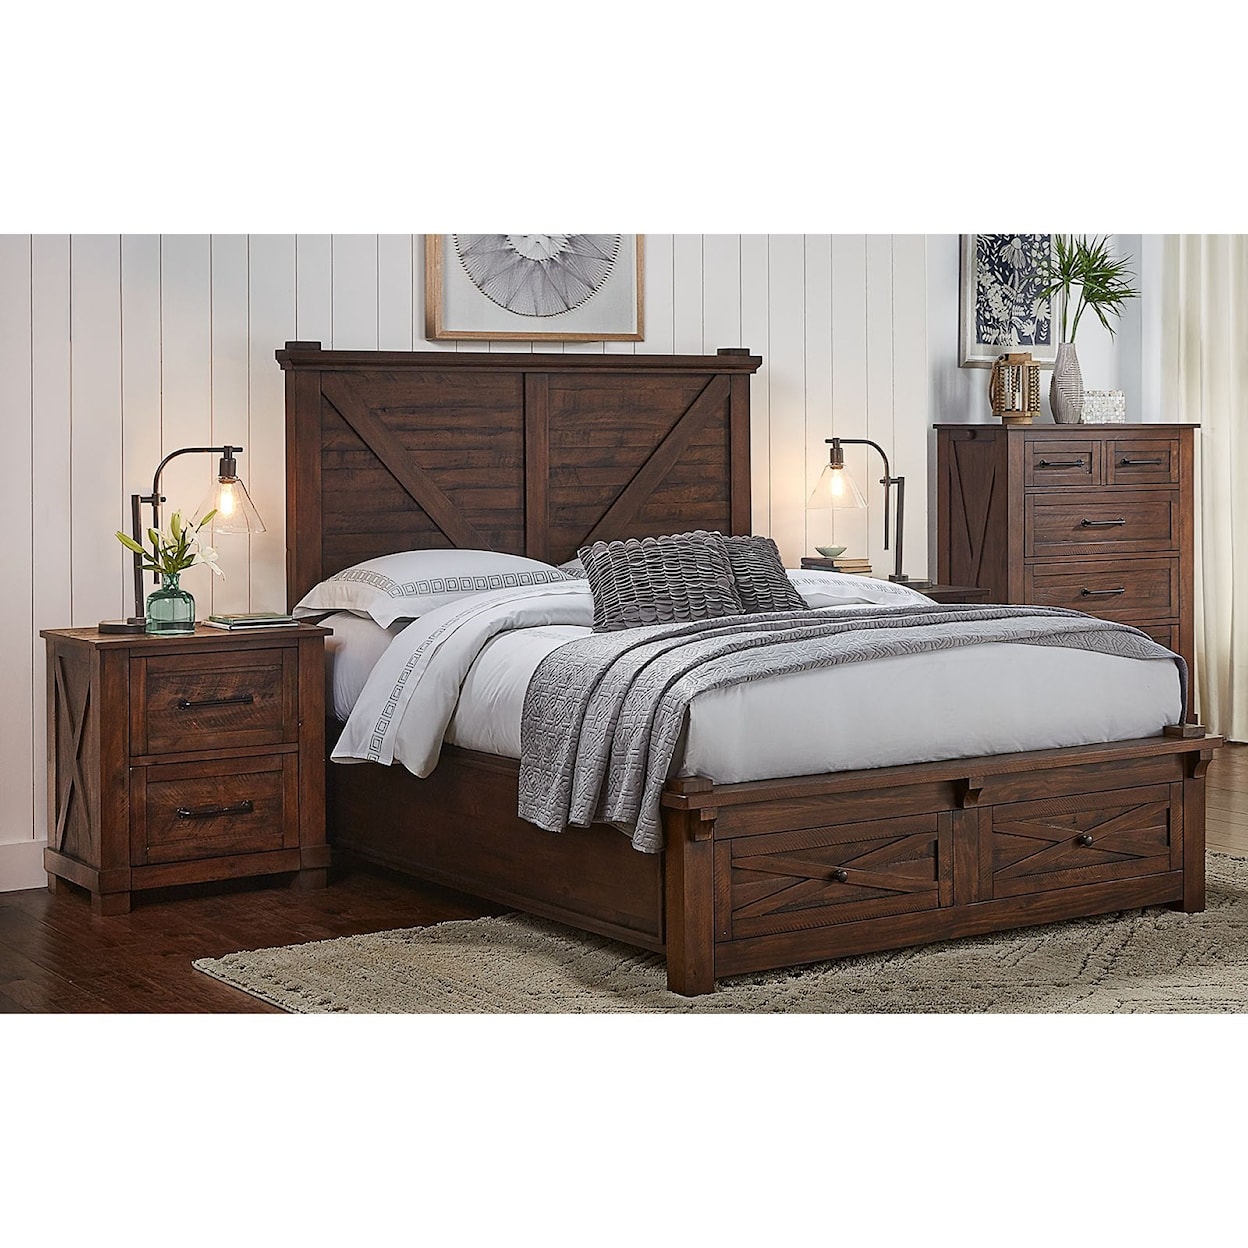 AAmerica Sun Valley King Bed with Footboard Bench